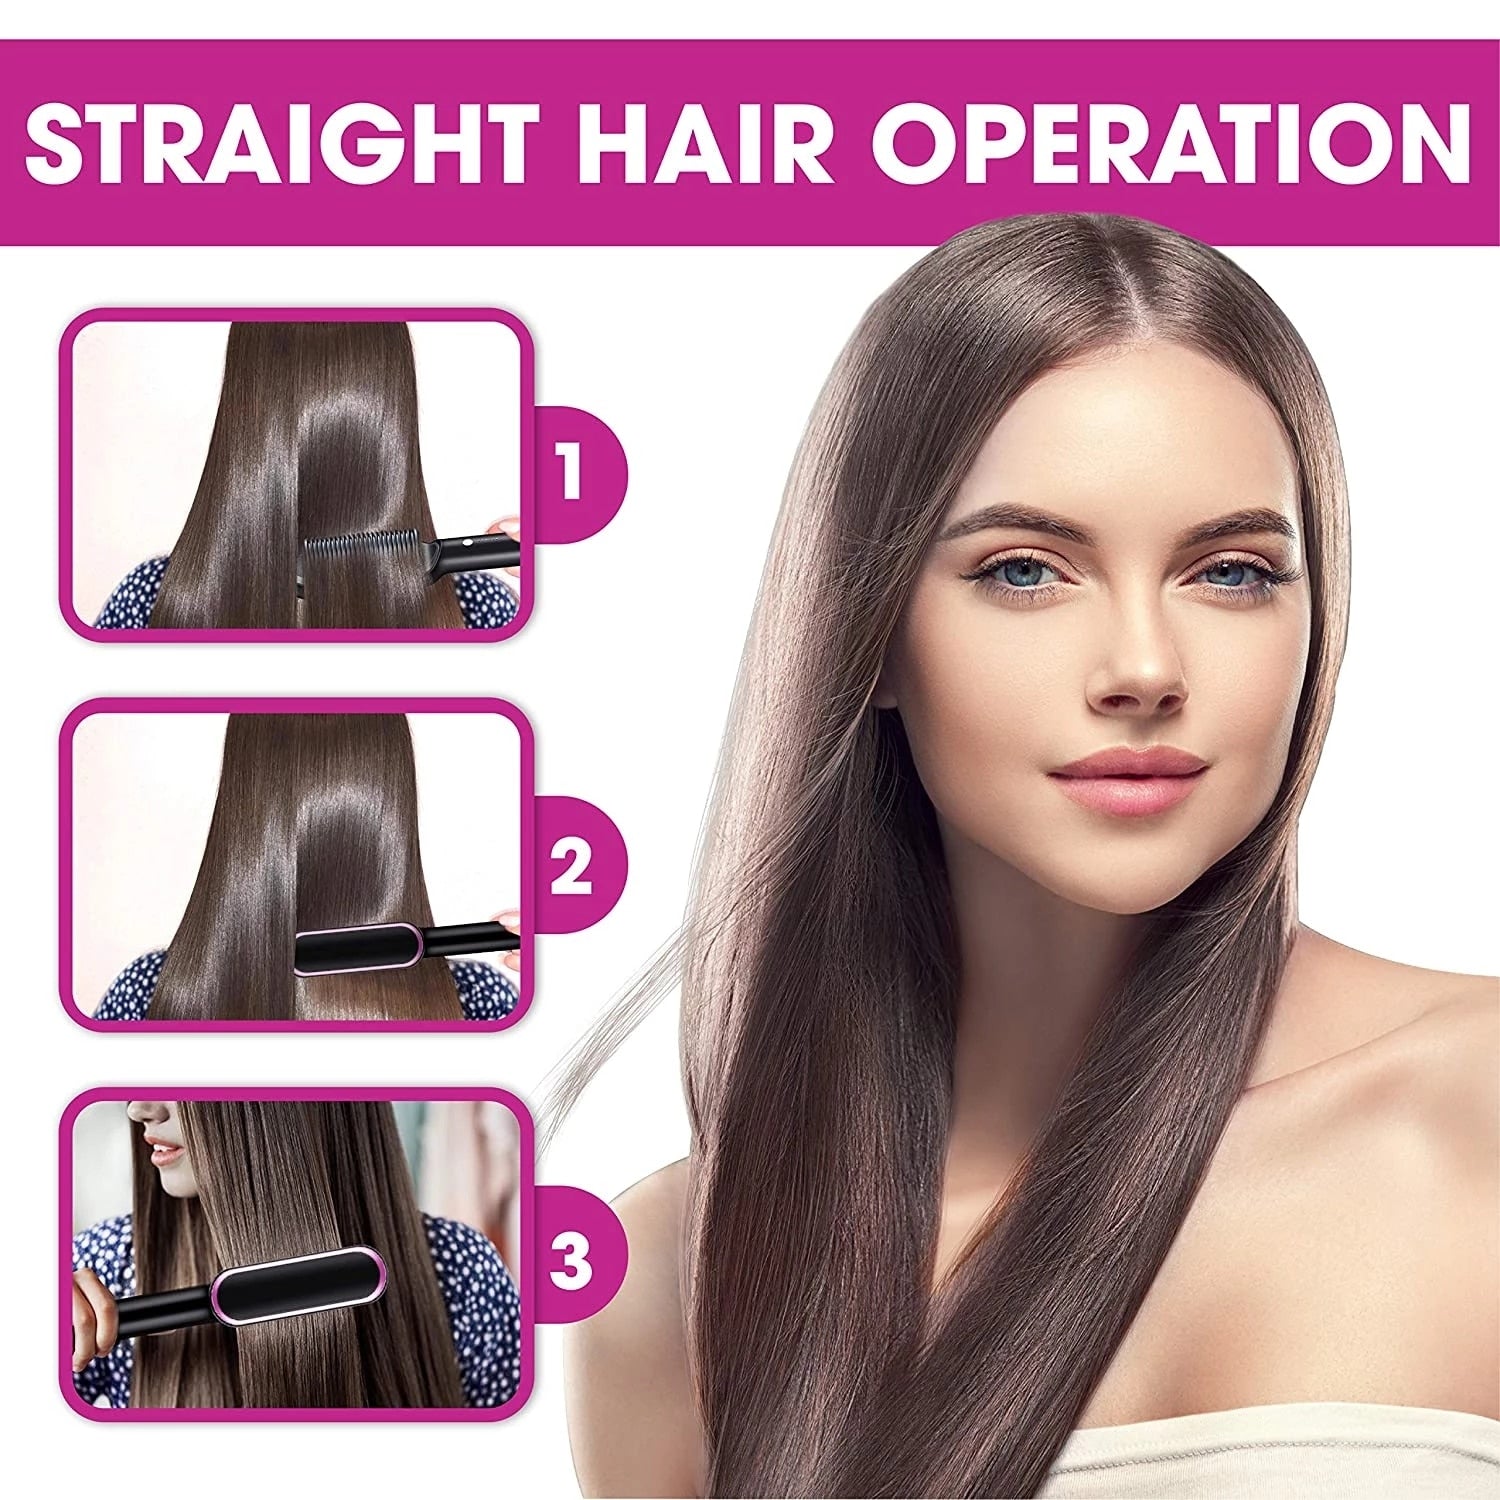 Revolutionary 5-Minute Ionic Hair Straightener Comb - Quick & Easy Styling for All Hair Types